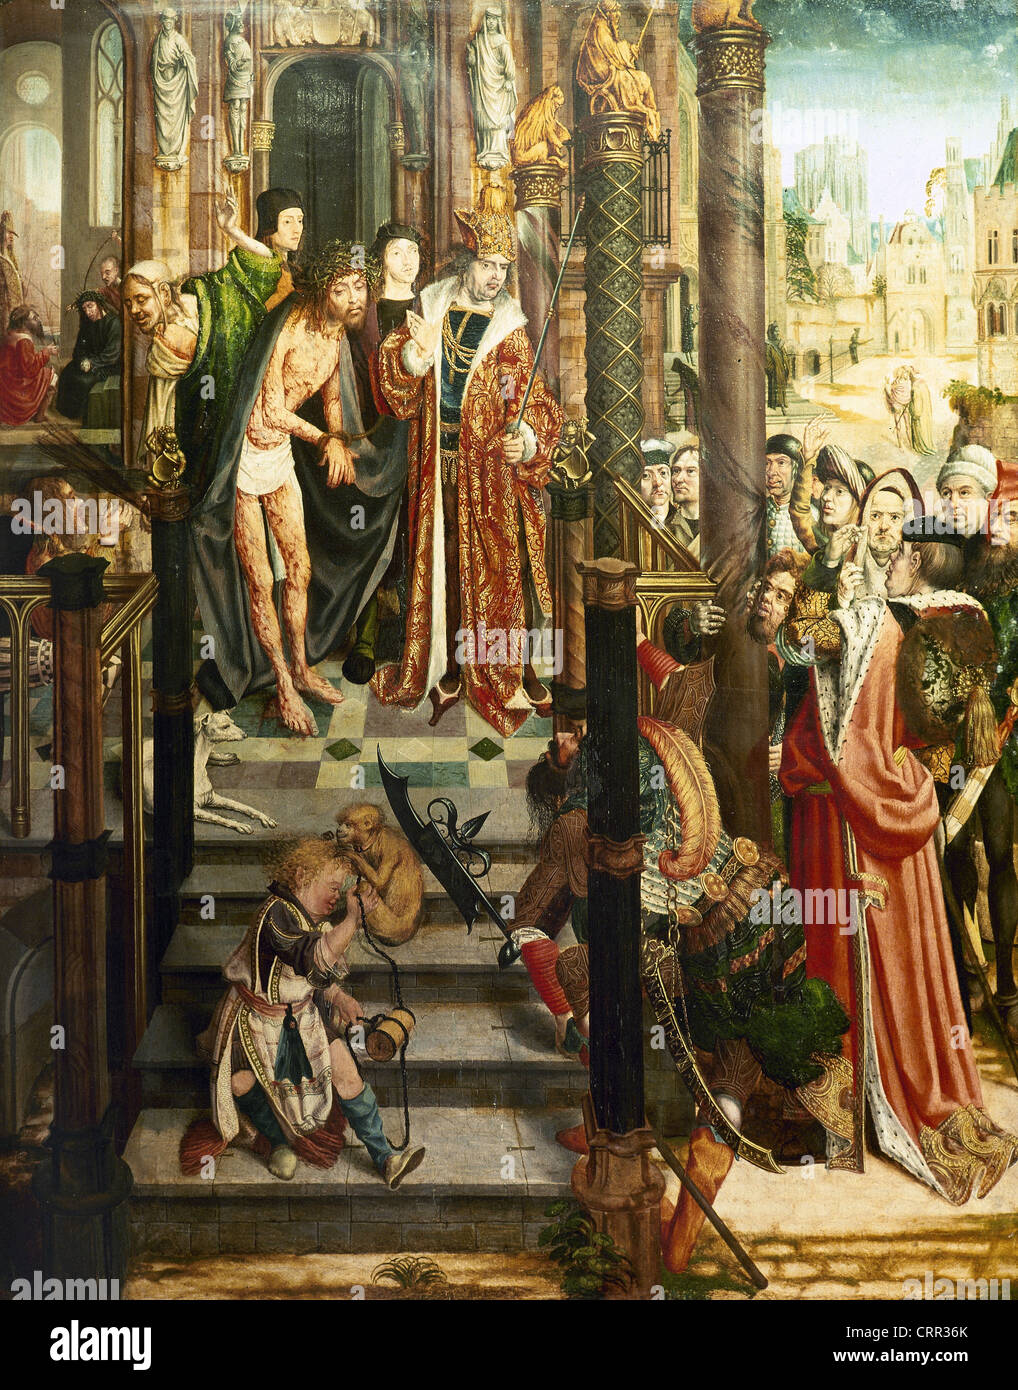 The Aachen Passion Altar. 1505-1510. By the Master of the Altars of Aachen. Detail. Ecce Homo. Left panel. Stock Photo